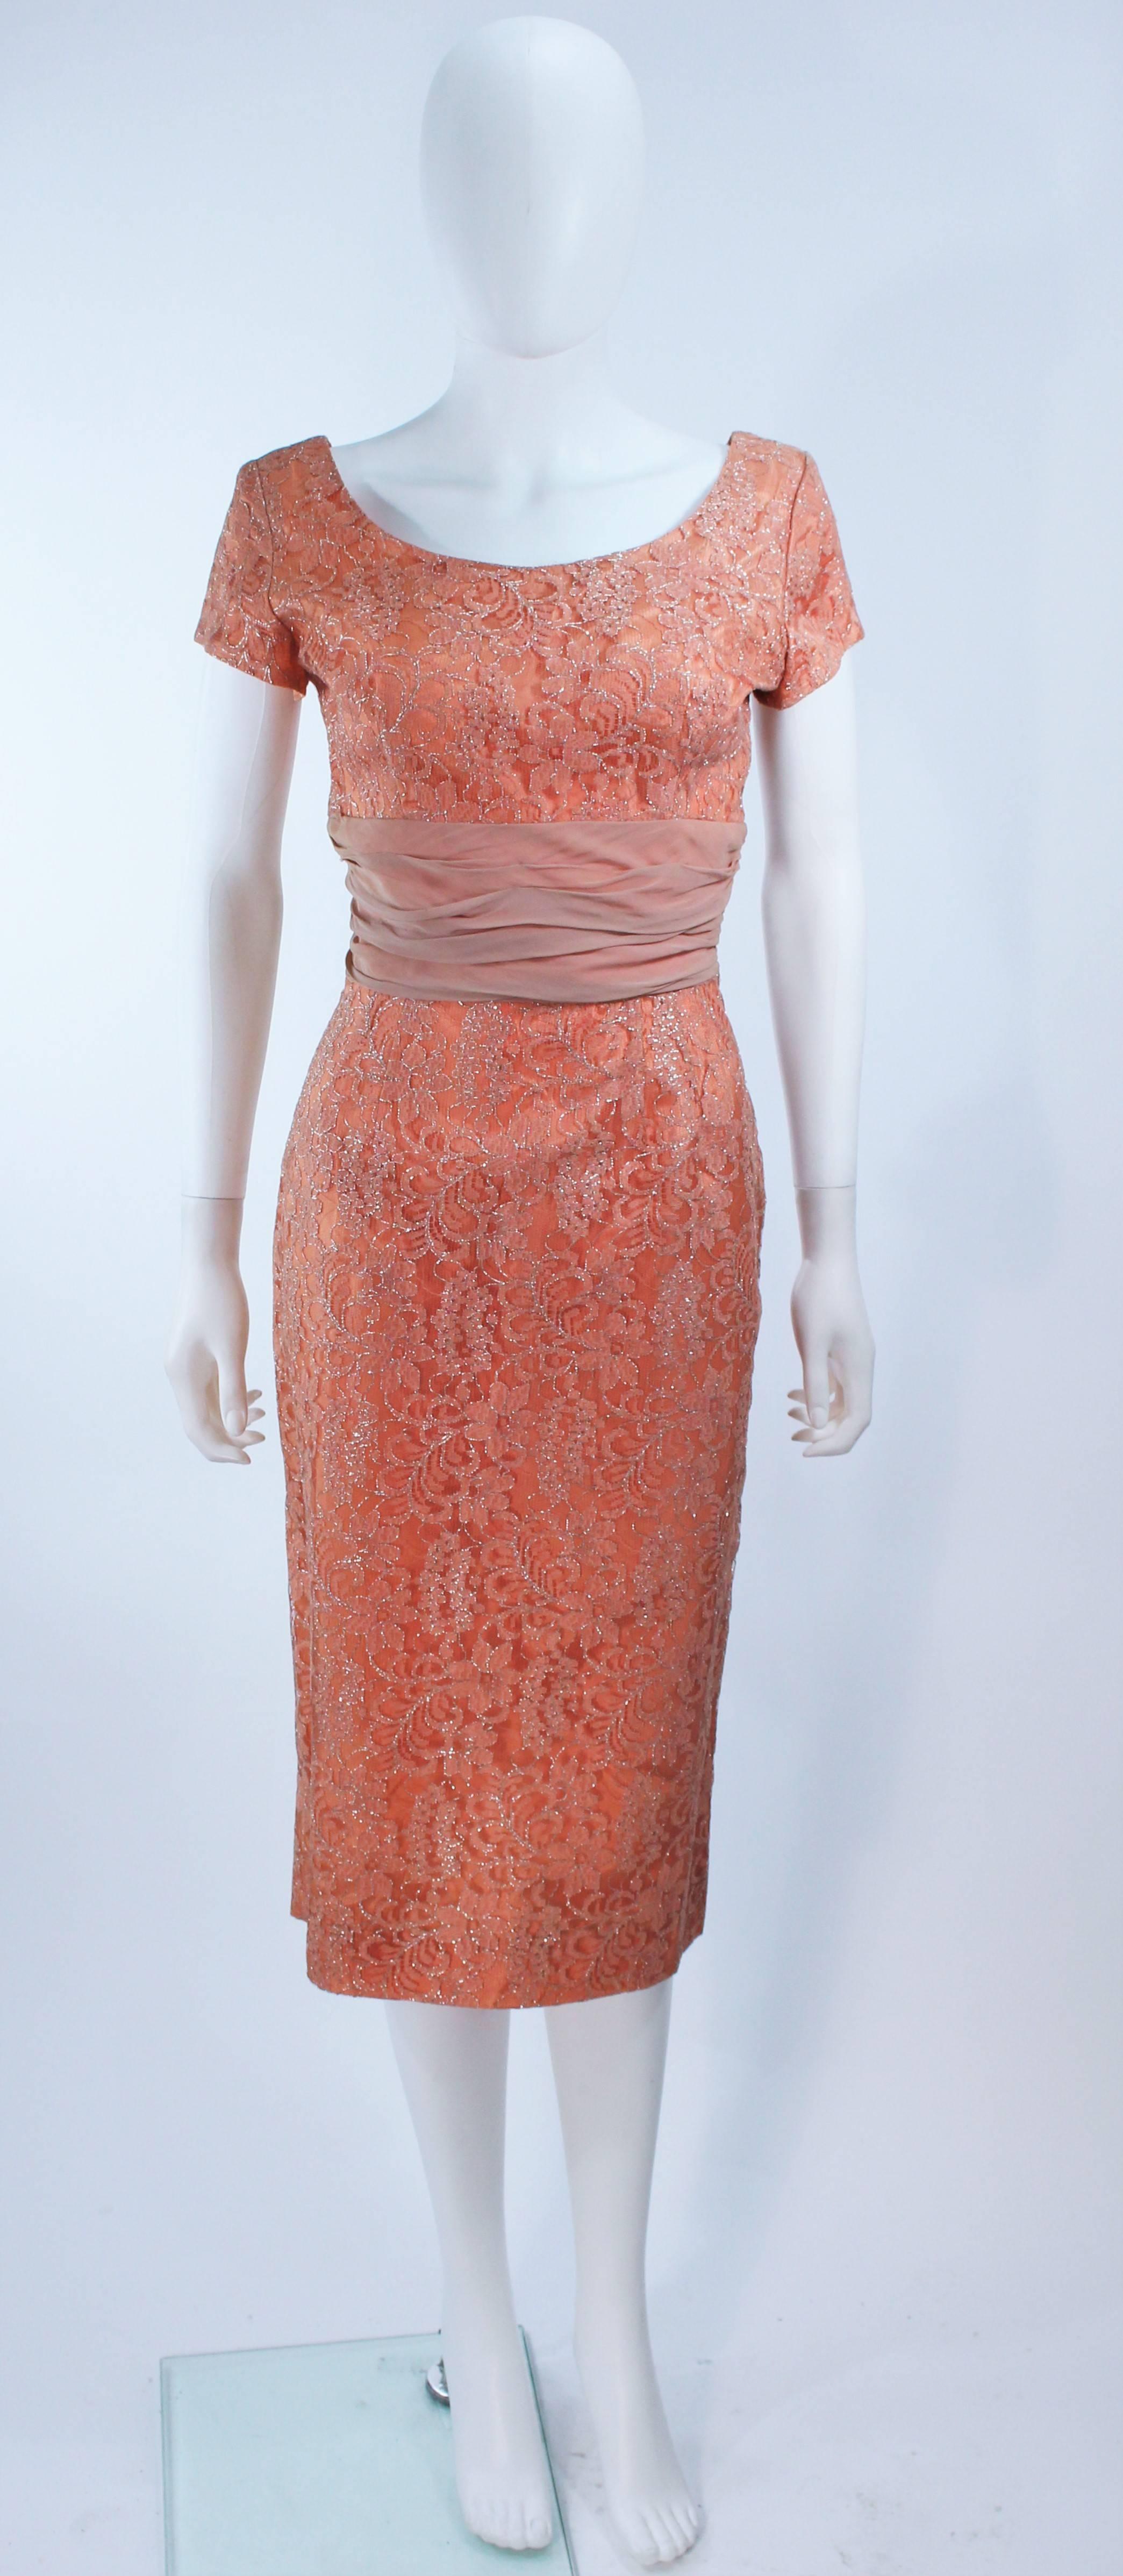  This cocktail dress is composed of a metallic peach hue lace. Features a gathered chiffon waist. There is a center back zipper closure. In great vintage condition.

  **Please cross-reference measurements for personal accuracy. Size in